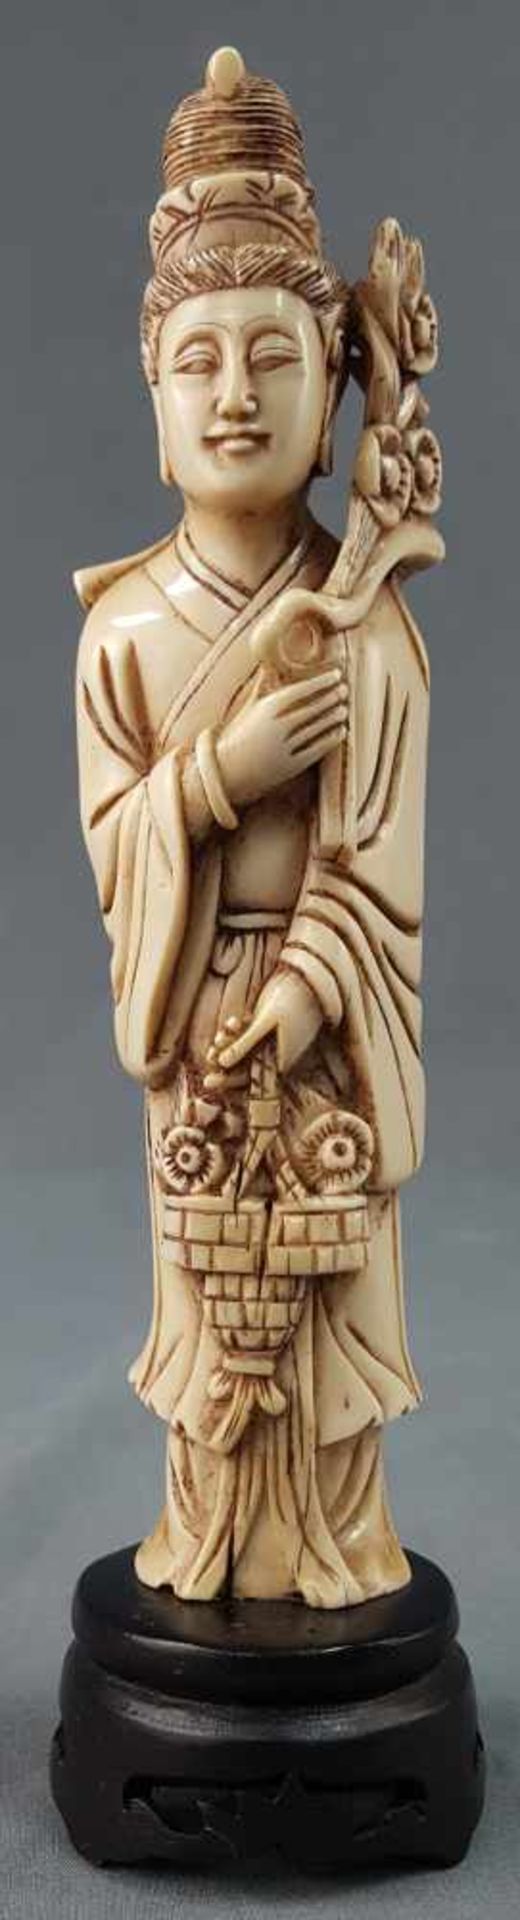 Lady with flowers. East Asia. China / Japan? Ivory. Old, around 1920.